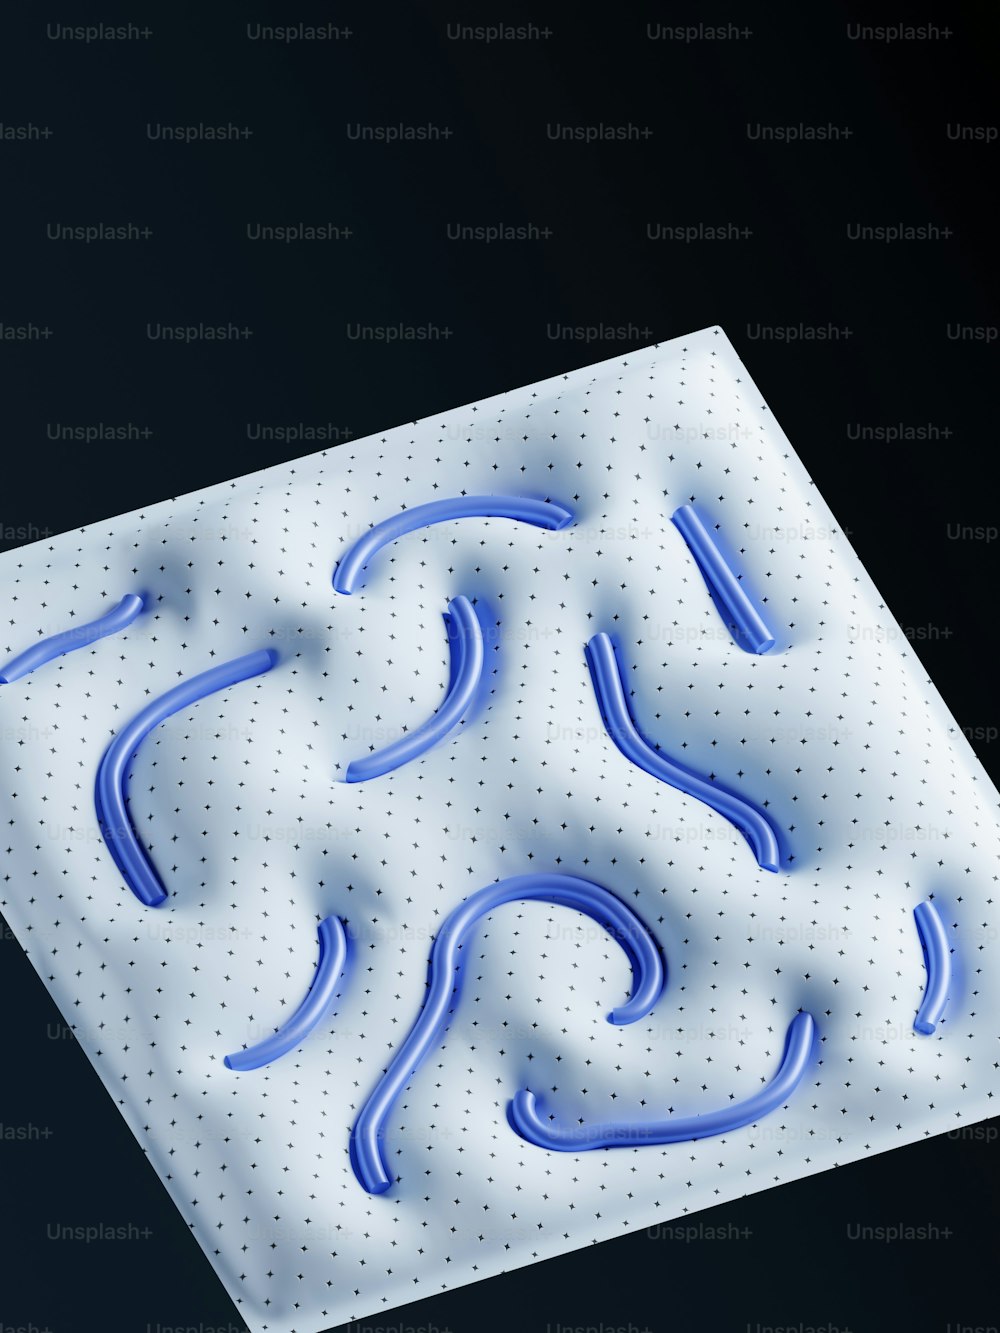 a 3d image of a square shaped object